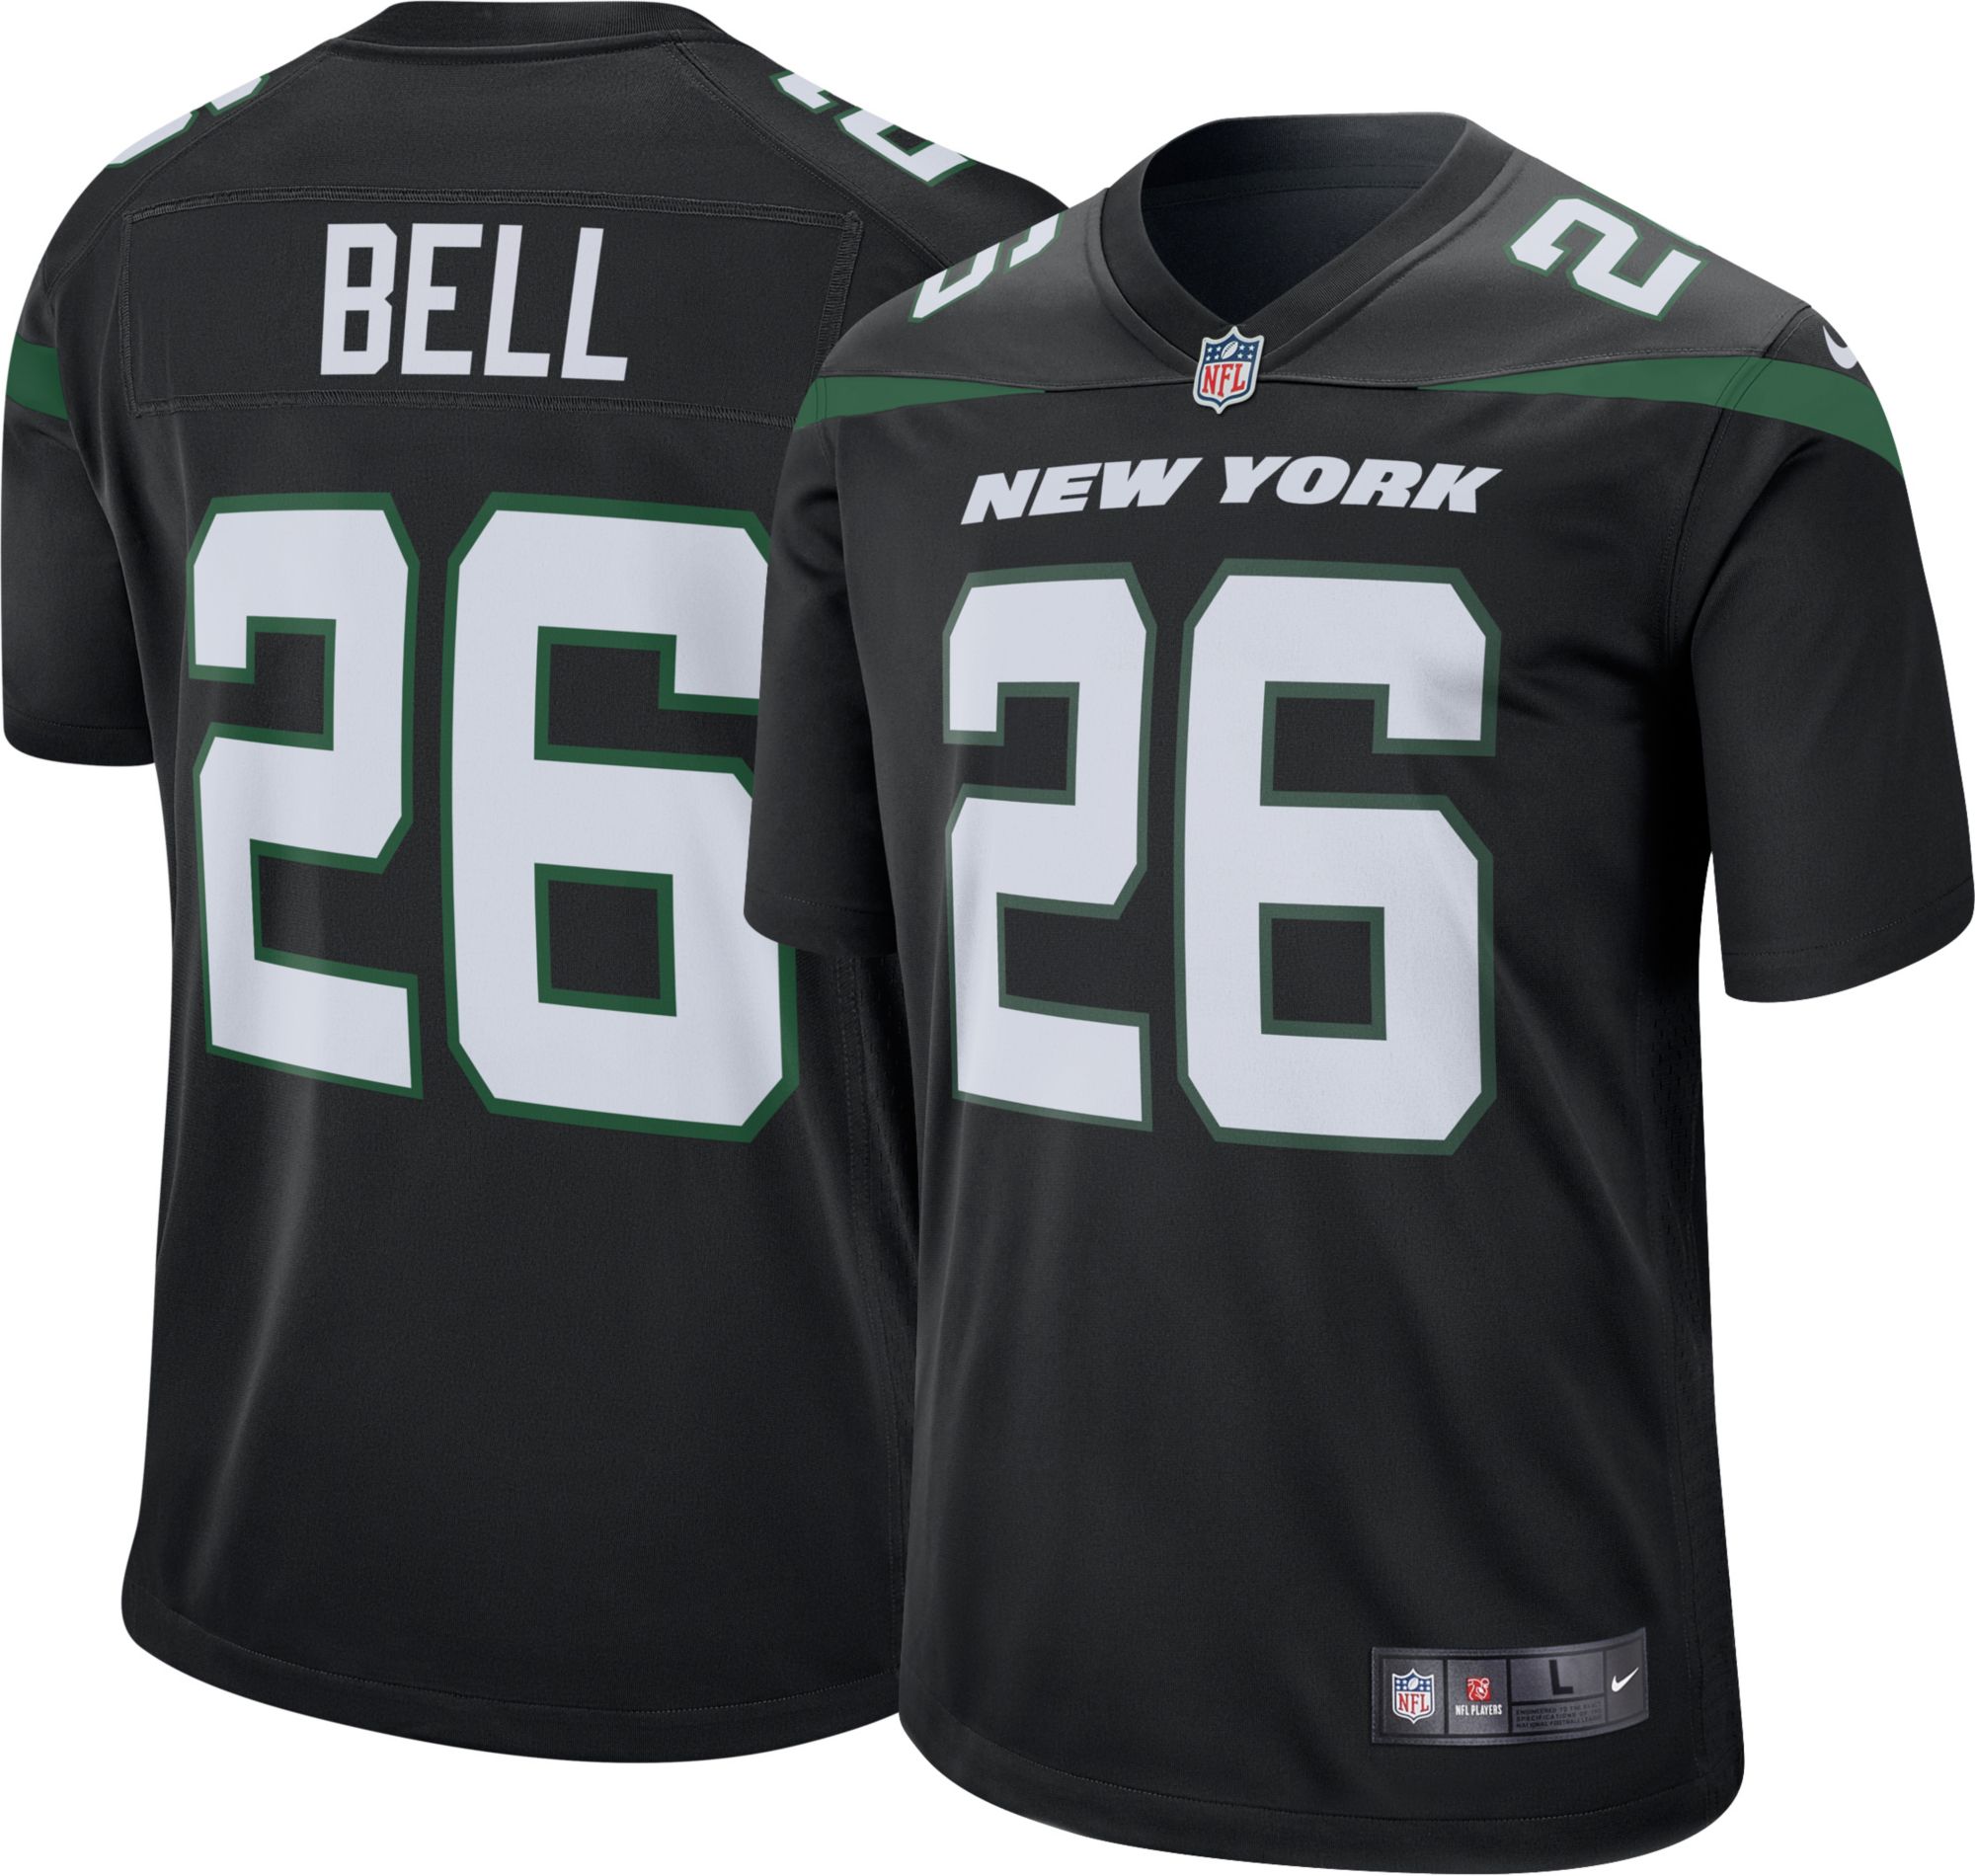 bell jersey jets